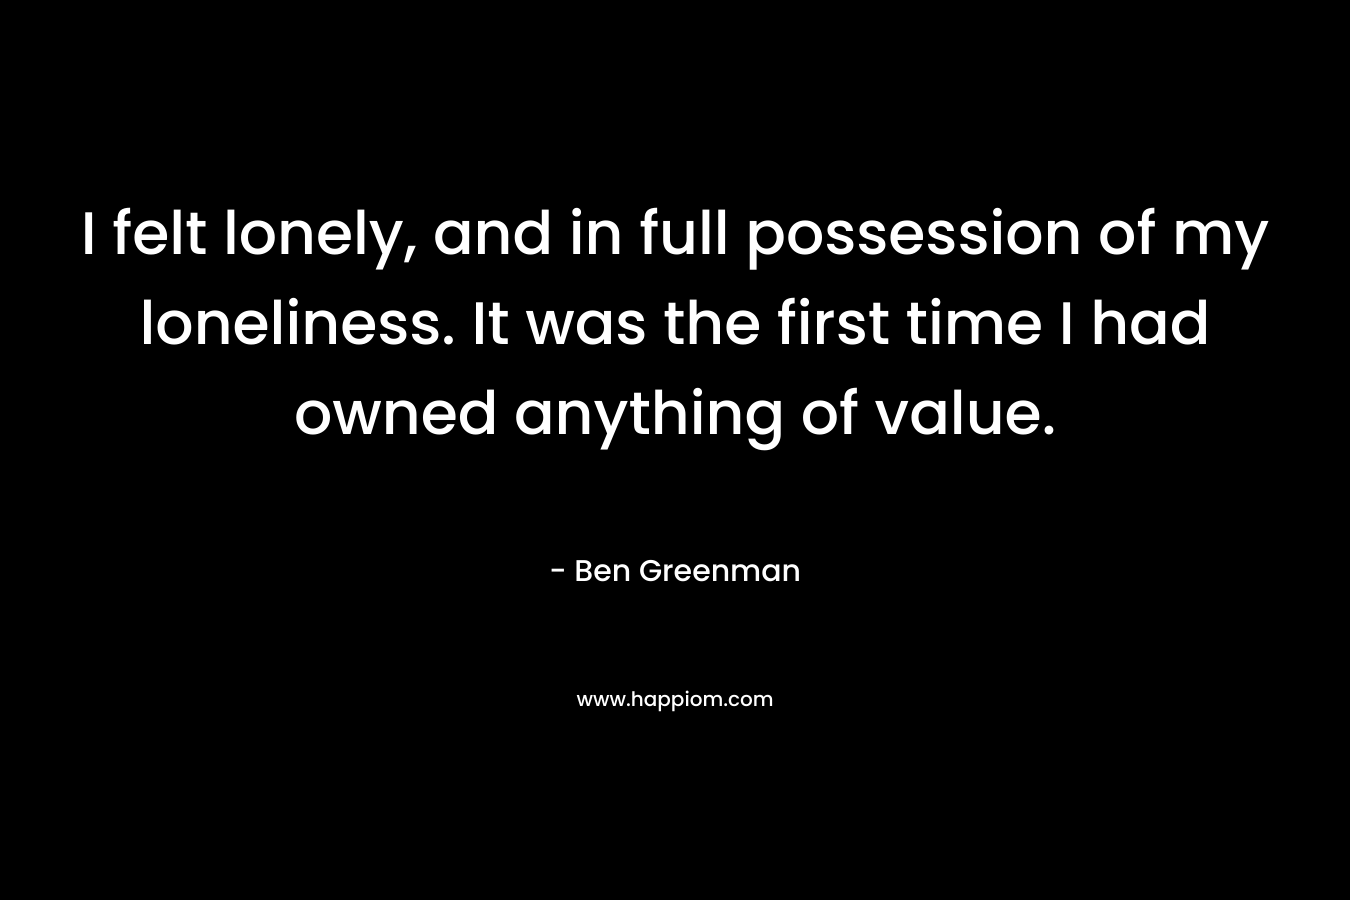 I felt lonely, and in full possession of my loneliness. It was the first time I had owned anything of value. – Ben Greenman